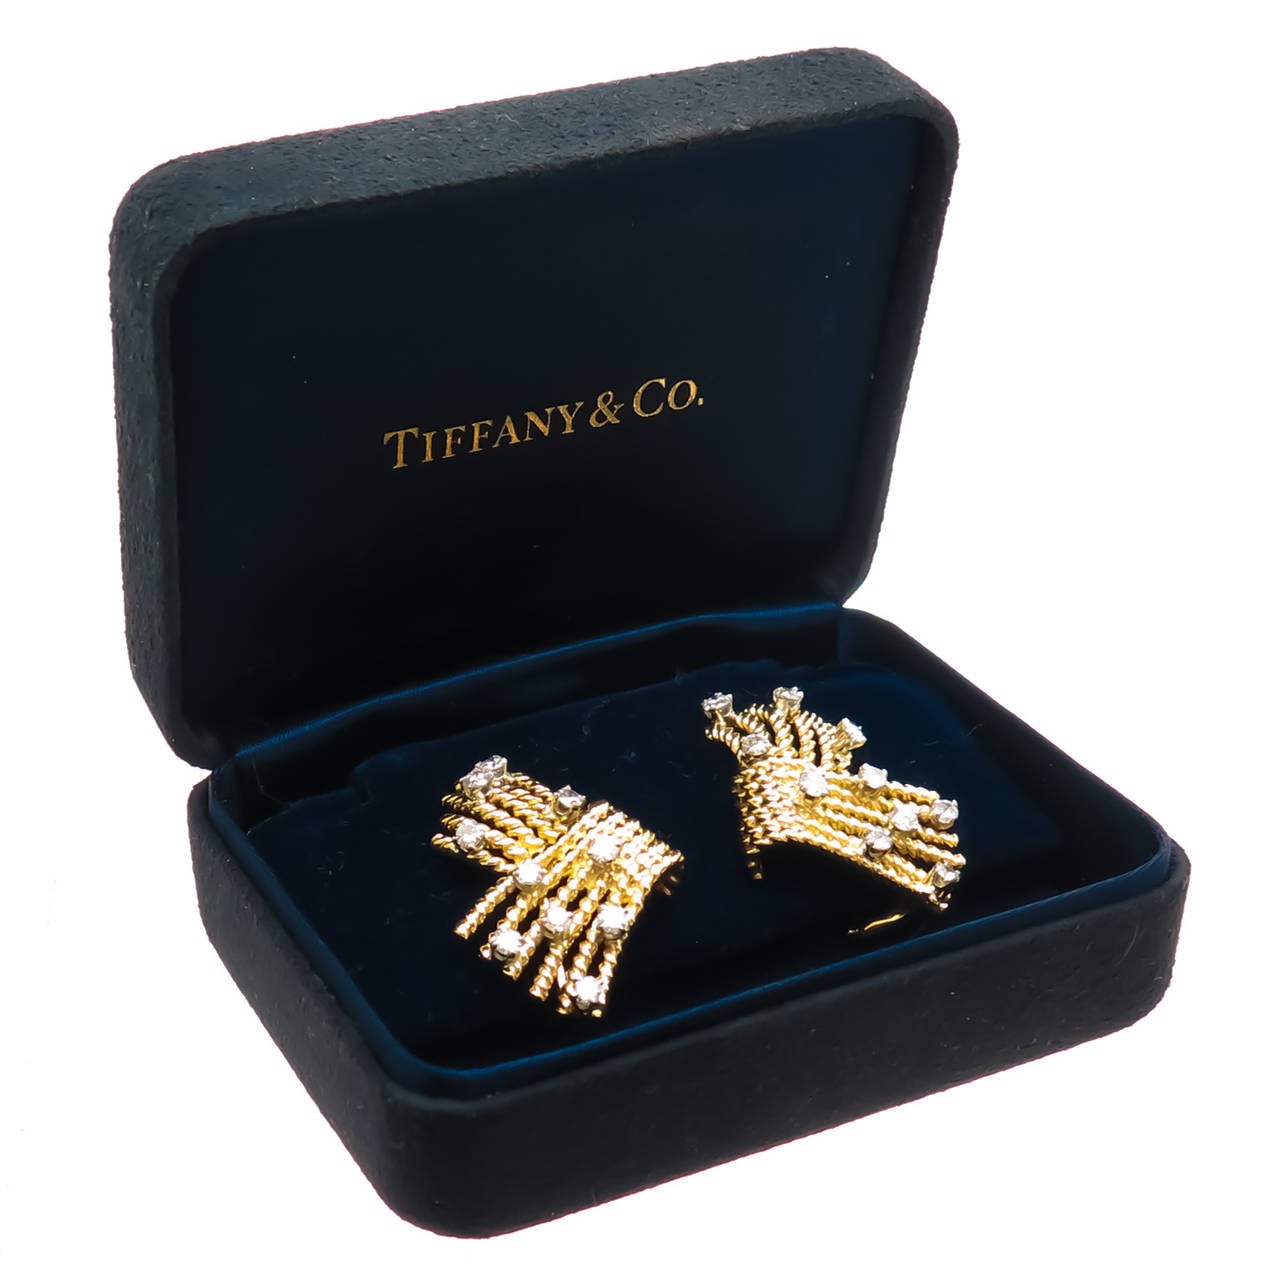 Jean Schlumberger for Tiffany & Company 18K Yellow Gold V Rope Ear Clips, set with 20 Round Brilliant cut Diamonds totaling 1.40 Carats. Omega Clip Backs to which posts can be easily added if desired. Comes in Original Tiffany Gift Box